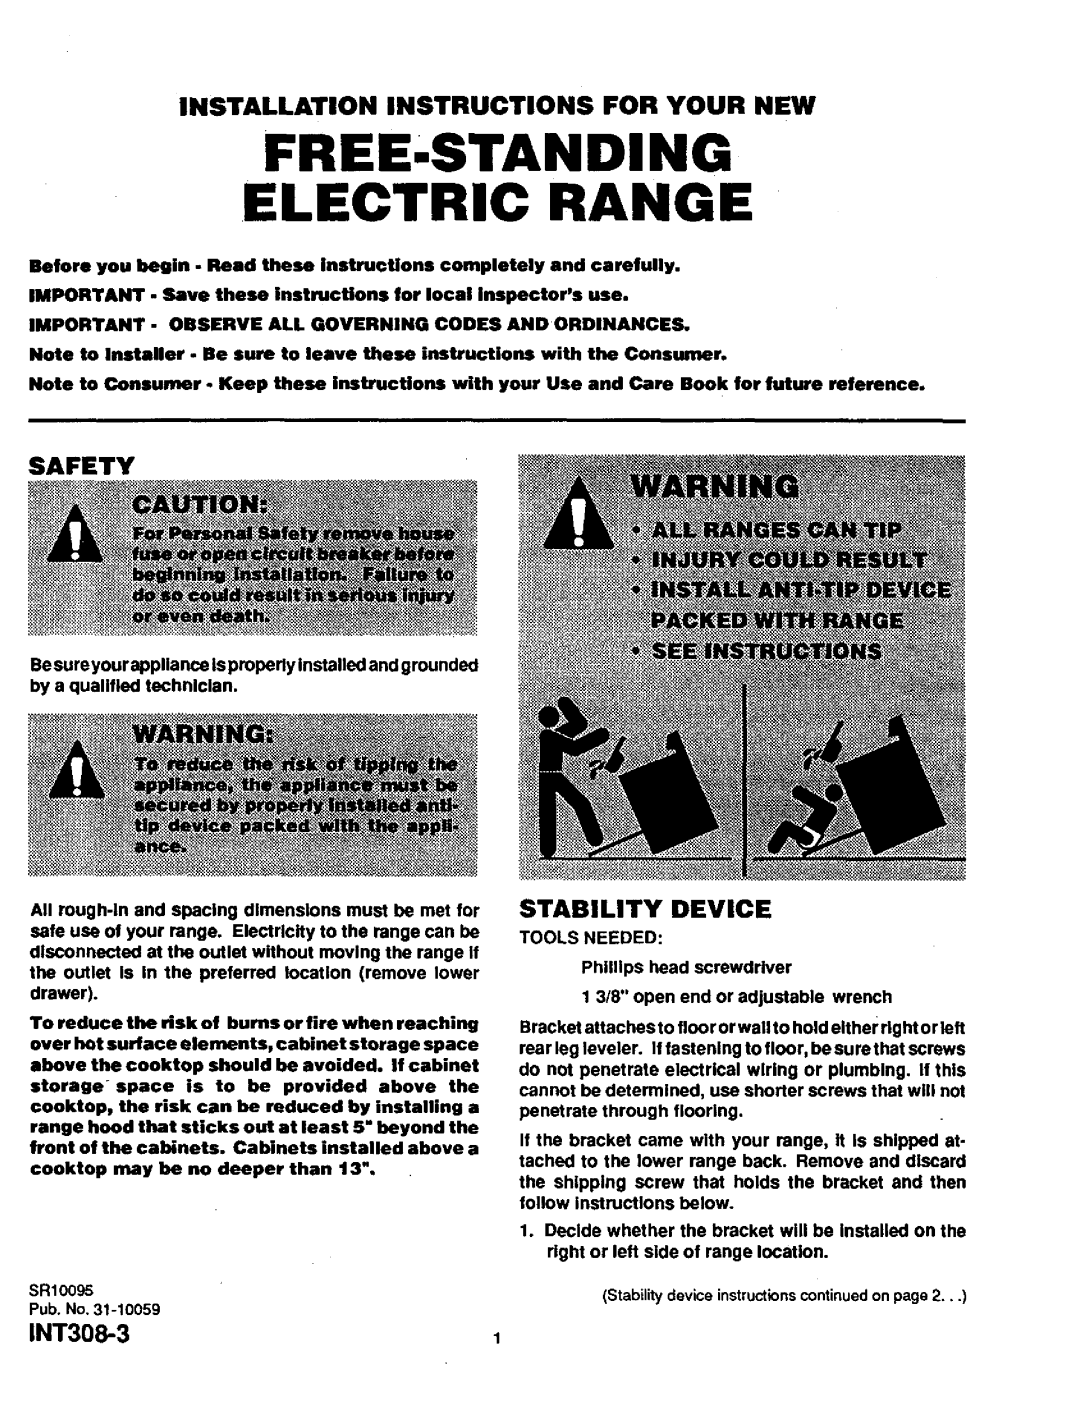 Sears SR10095 installation instructions Installation Instructions For Your New, Safety, Stability Device, INT308-31 